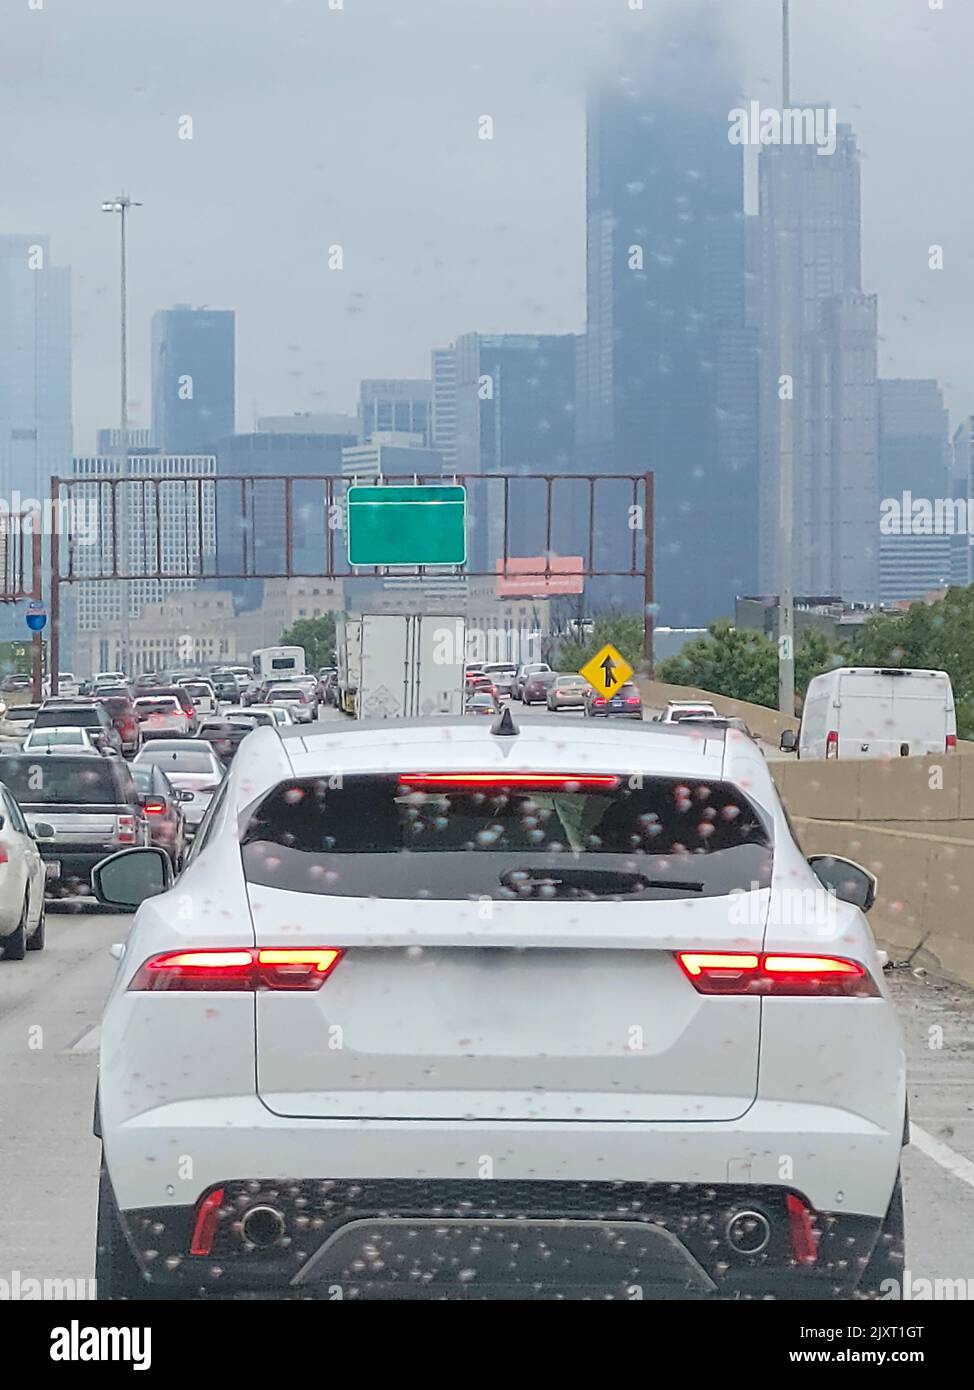 View of congested Chicago city traffic through a windshield with raindrops Stock Photo